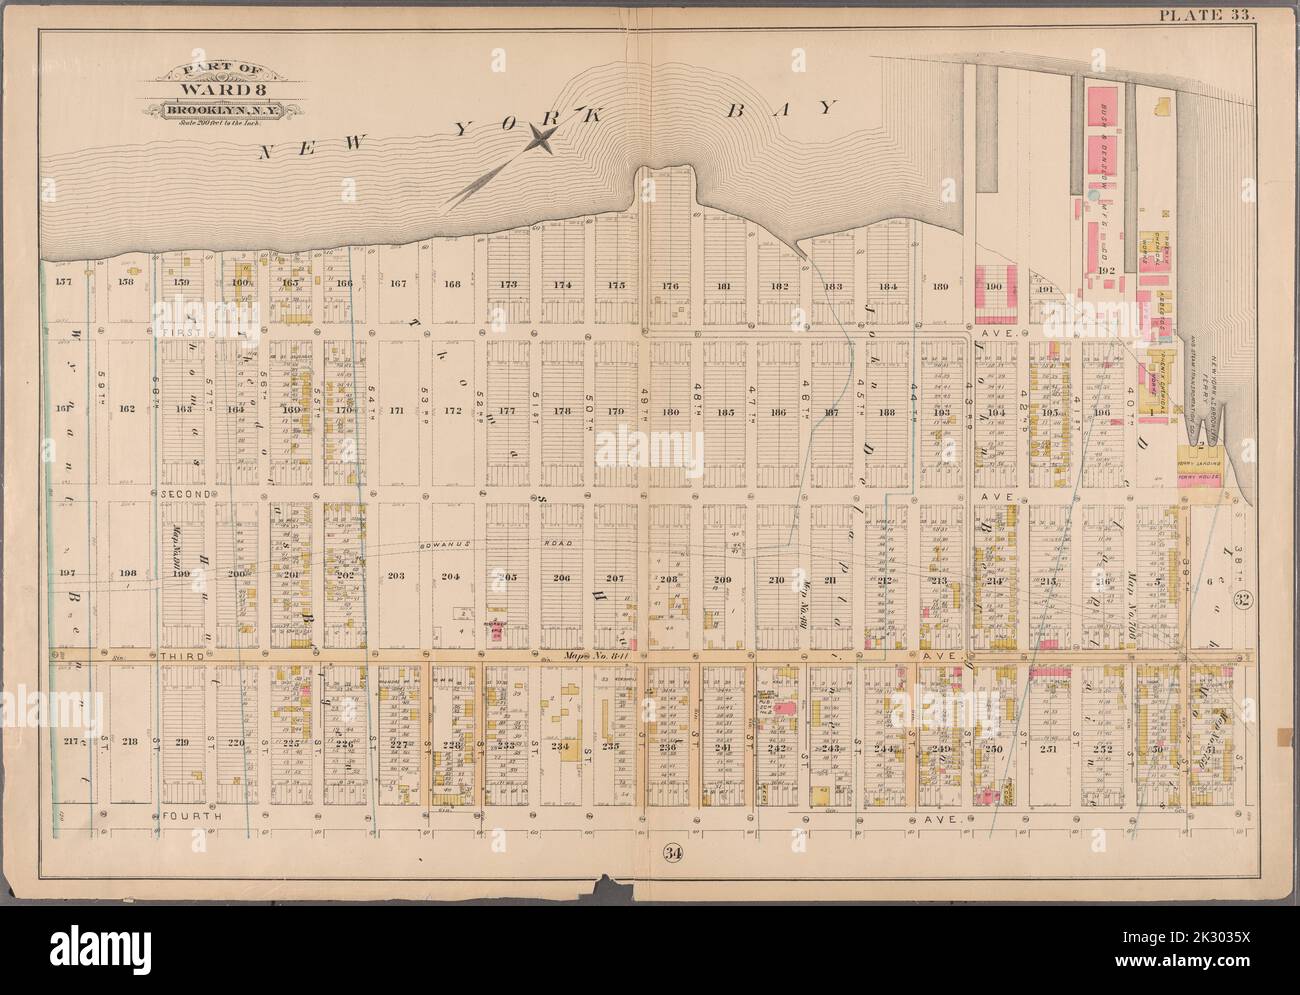 Cartographic, Maps. 1886. Lionel Pincus and Princess Firyal Map Division. Brooklyn (New York, N.Y.), Real property , New York (State) , New York Plate 33: Bounded by (New York Bay & Piers) First Avenue, 38th Street, Fourth Avenue and 59th Street. Plate 33: Part of Ward 8. Brooklyn, N.Y. Stock Photo